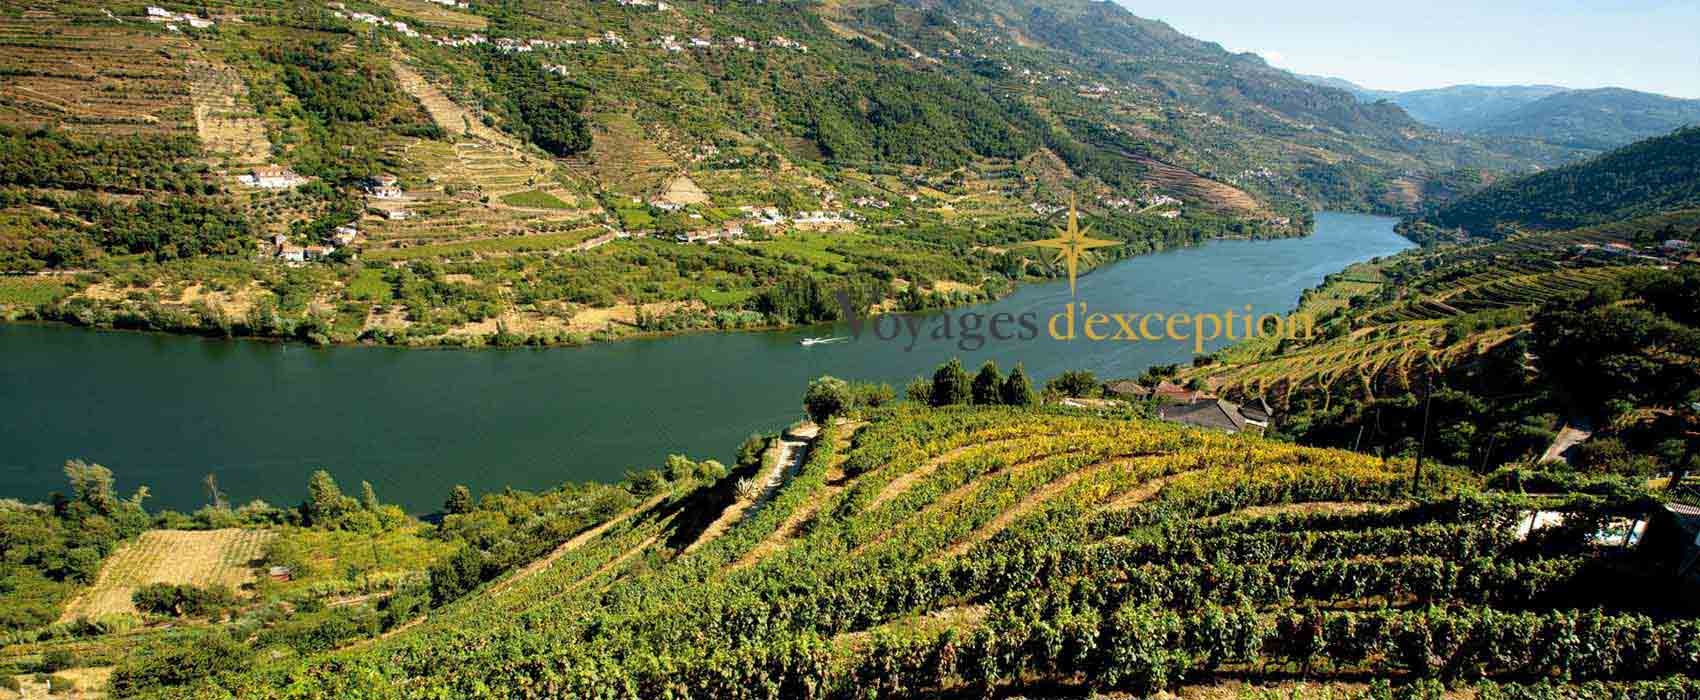 From 17/09 to 24/09: Musical cruise on the Douro River